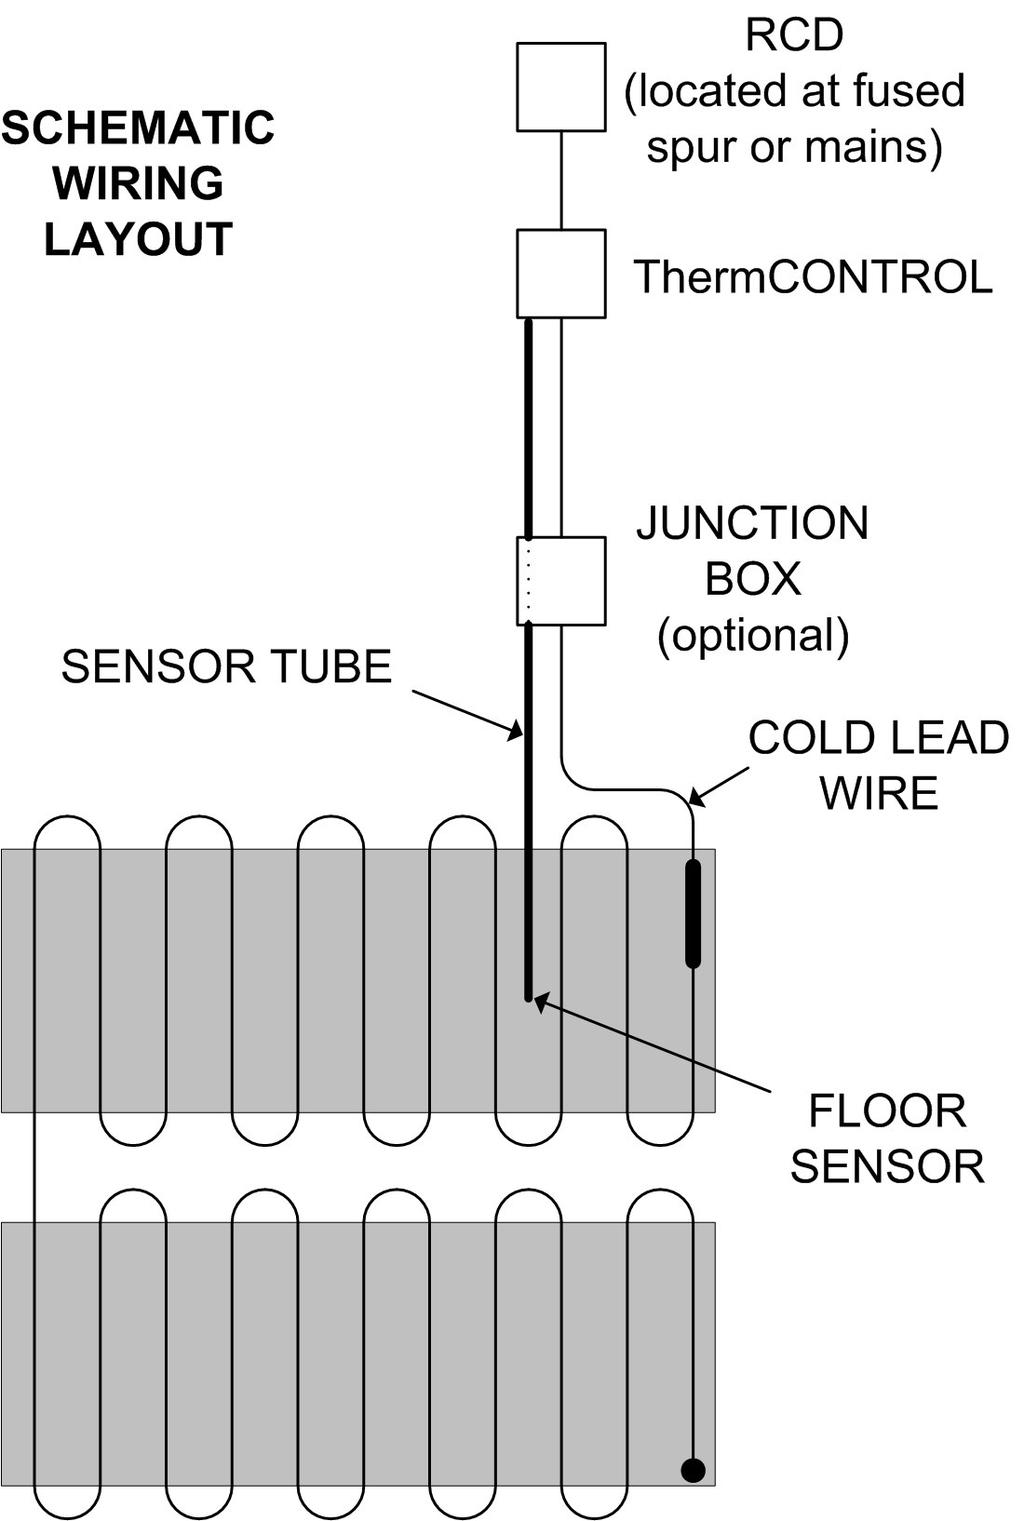 THE HEATING CABLE MUST NOT BE CUT To facilitate installation it is possible to cut the 4m long cold lead wire to suit. The above schematic is a basic configuration of the wiring requirements.